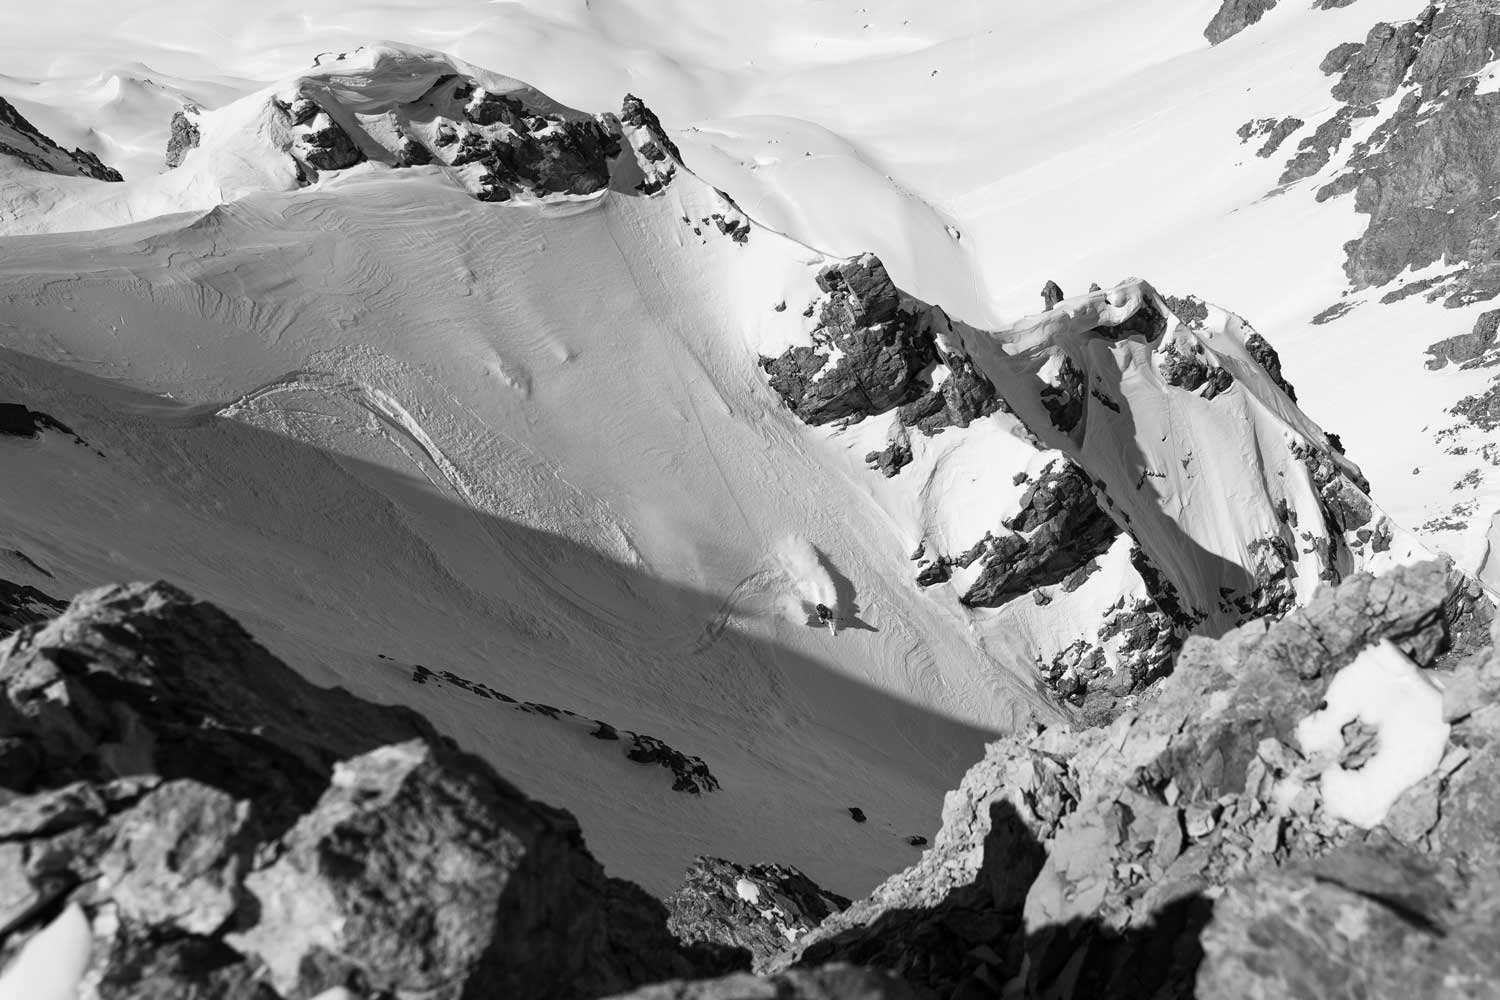 Couloir skiing at LAcs Merlets, Vanoise.